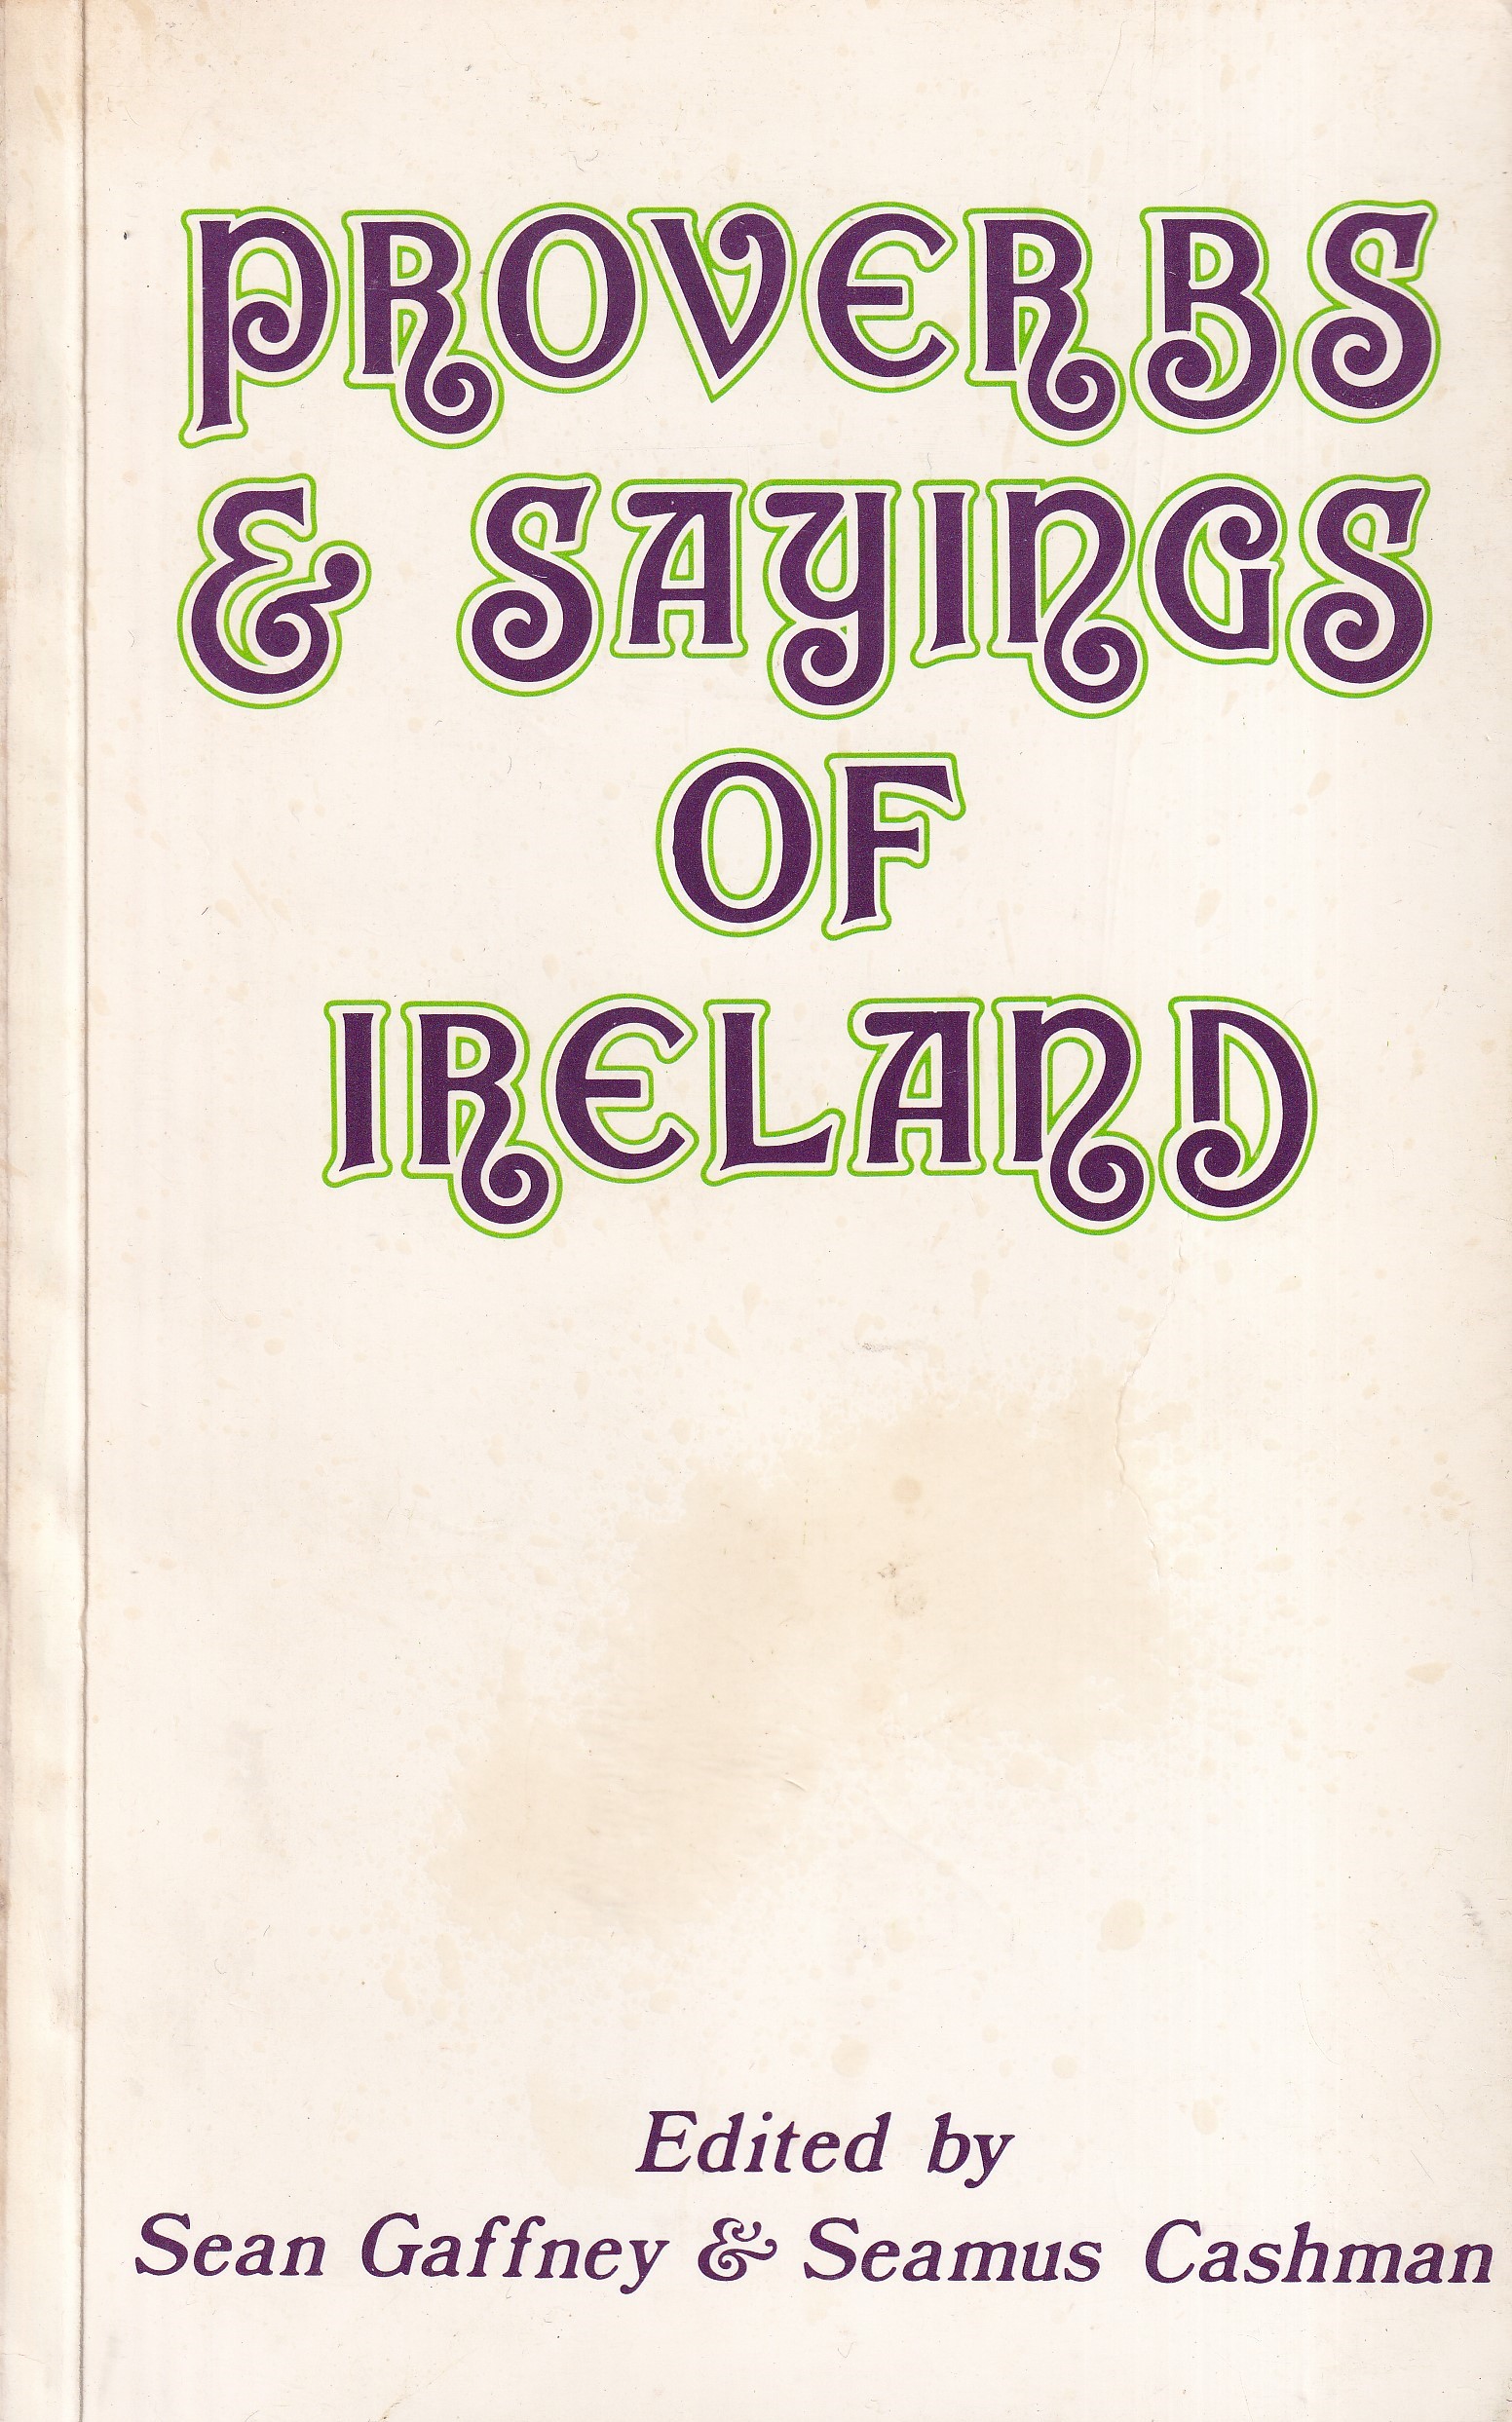 Proverbs and Sayings of Ireland | Seamus Cashman and Sean Gaffney (eds.) | Charlie Byrne's